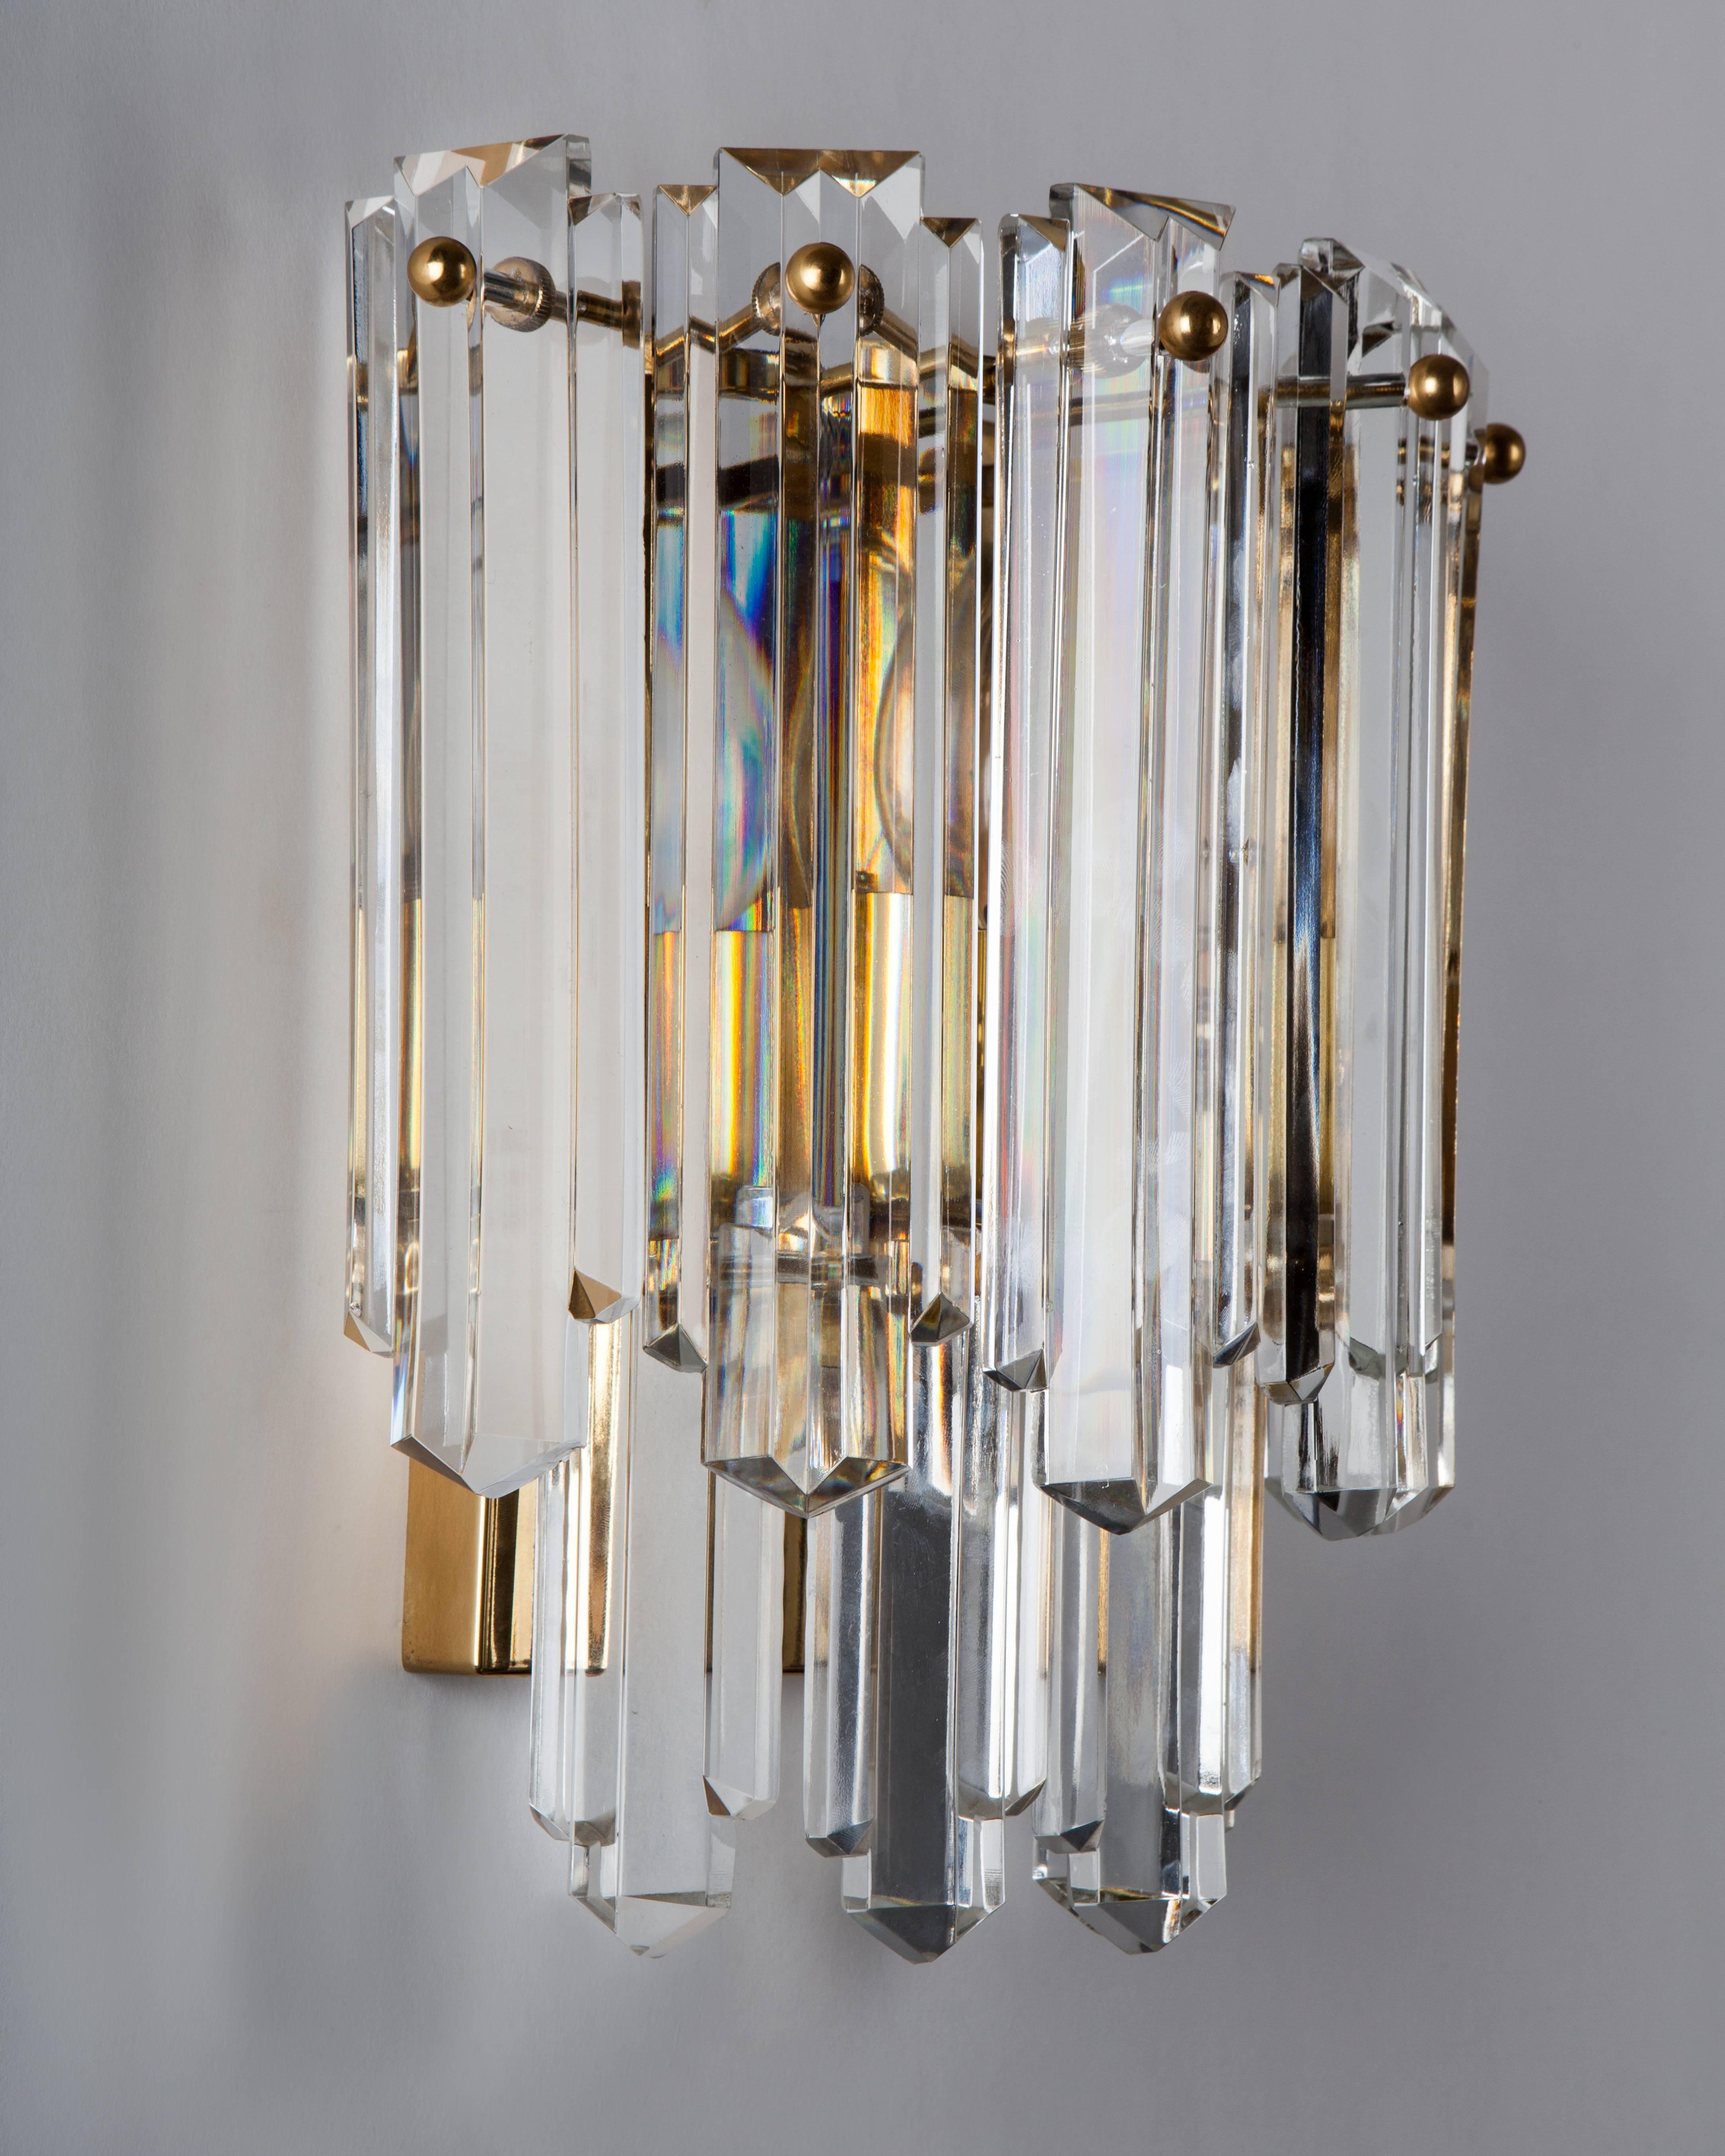 AIS2987.
A single vintage sconce with slender faceted prisms on a frame in its original gilded finish. Signed by the Austrian maker Kalmar. Due to the antique nature of this fixture, there may be some nicks or imperfections in the glass as well as